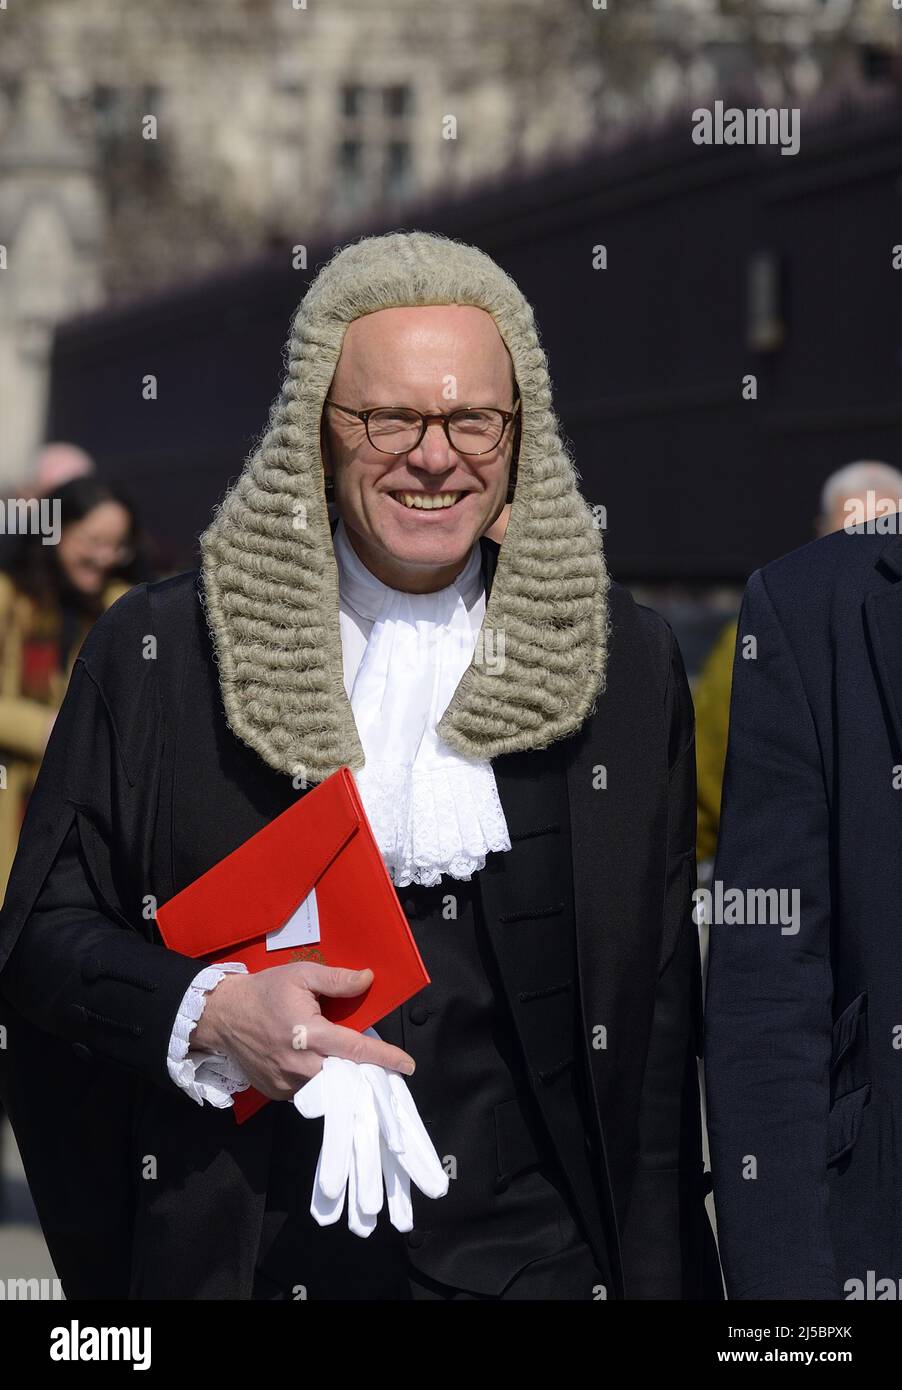 Andrew Westwood QC outside Parliament, March 2022 Stock Photo